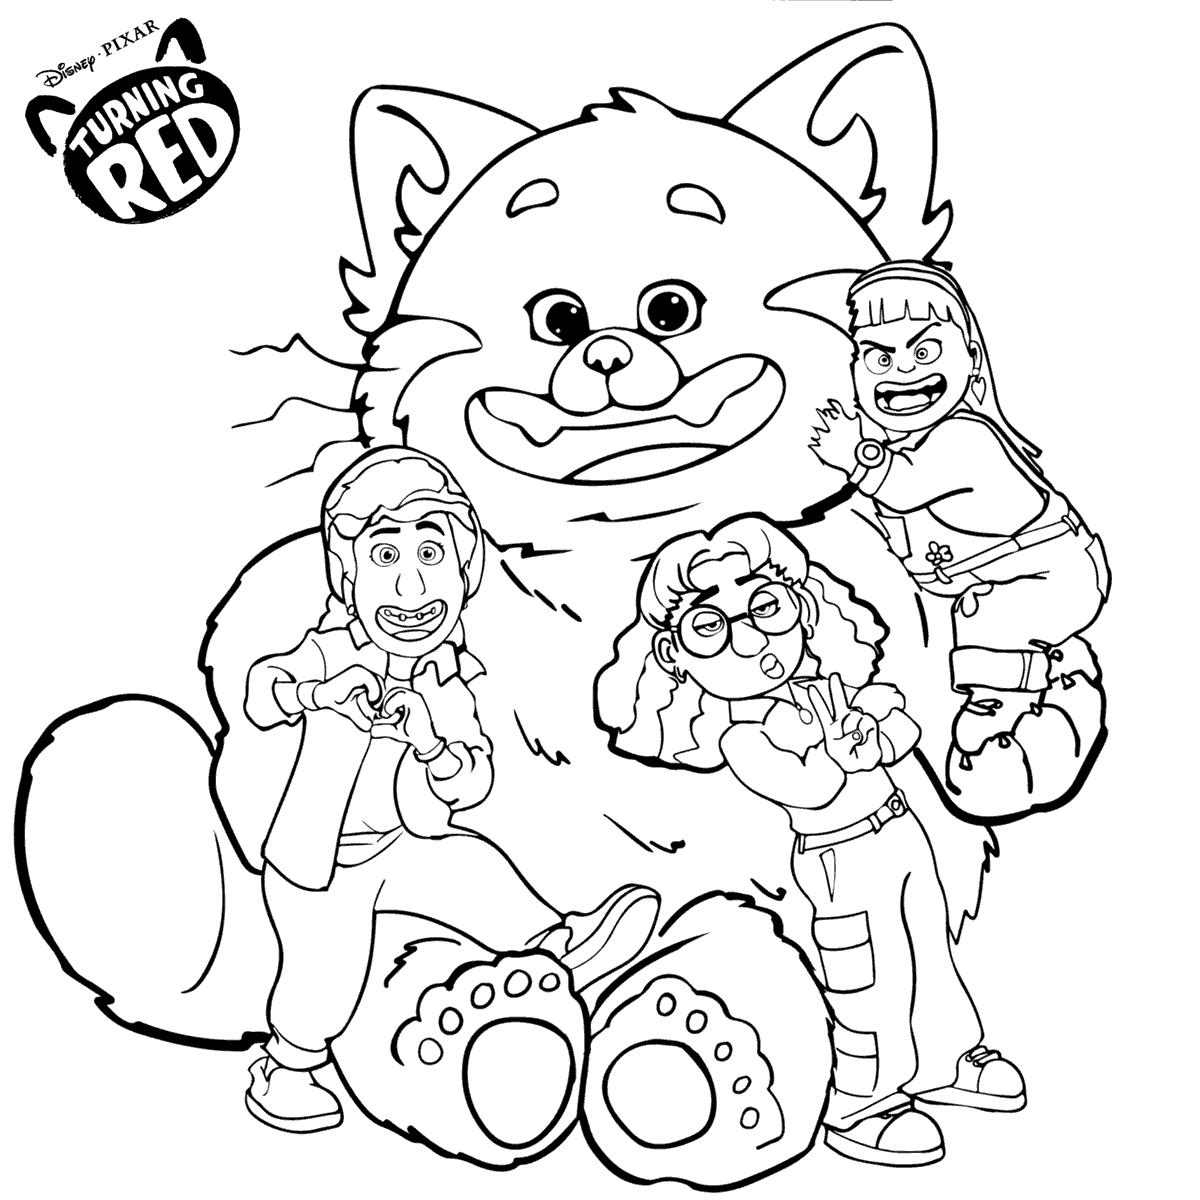 Girl Gang from Turning Red coloring page